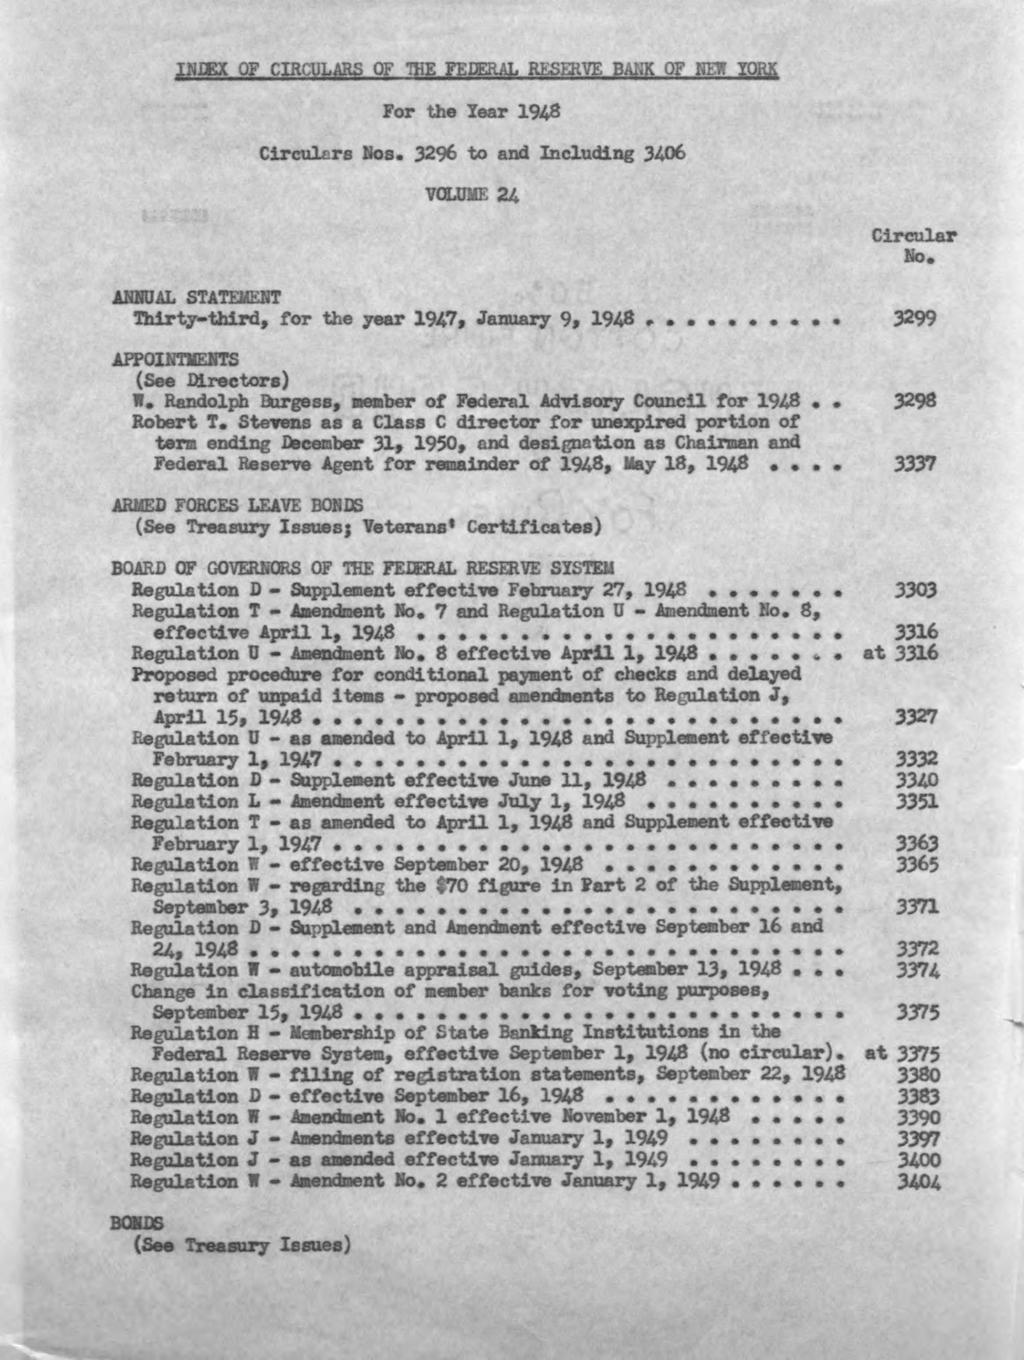 INDEX OF CIRCULARS OF THE FEUDAL RESERVE BAM OF NEW YORK For the Year 1948 Nos.